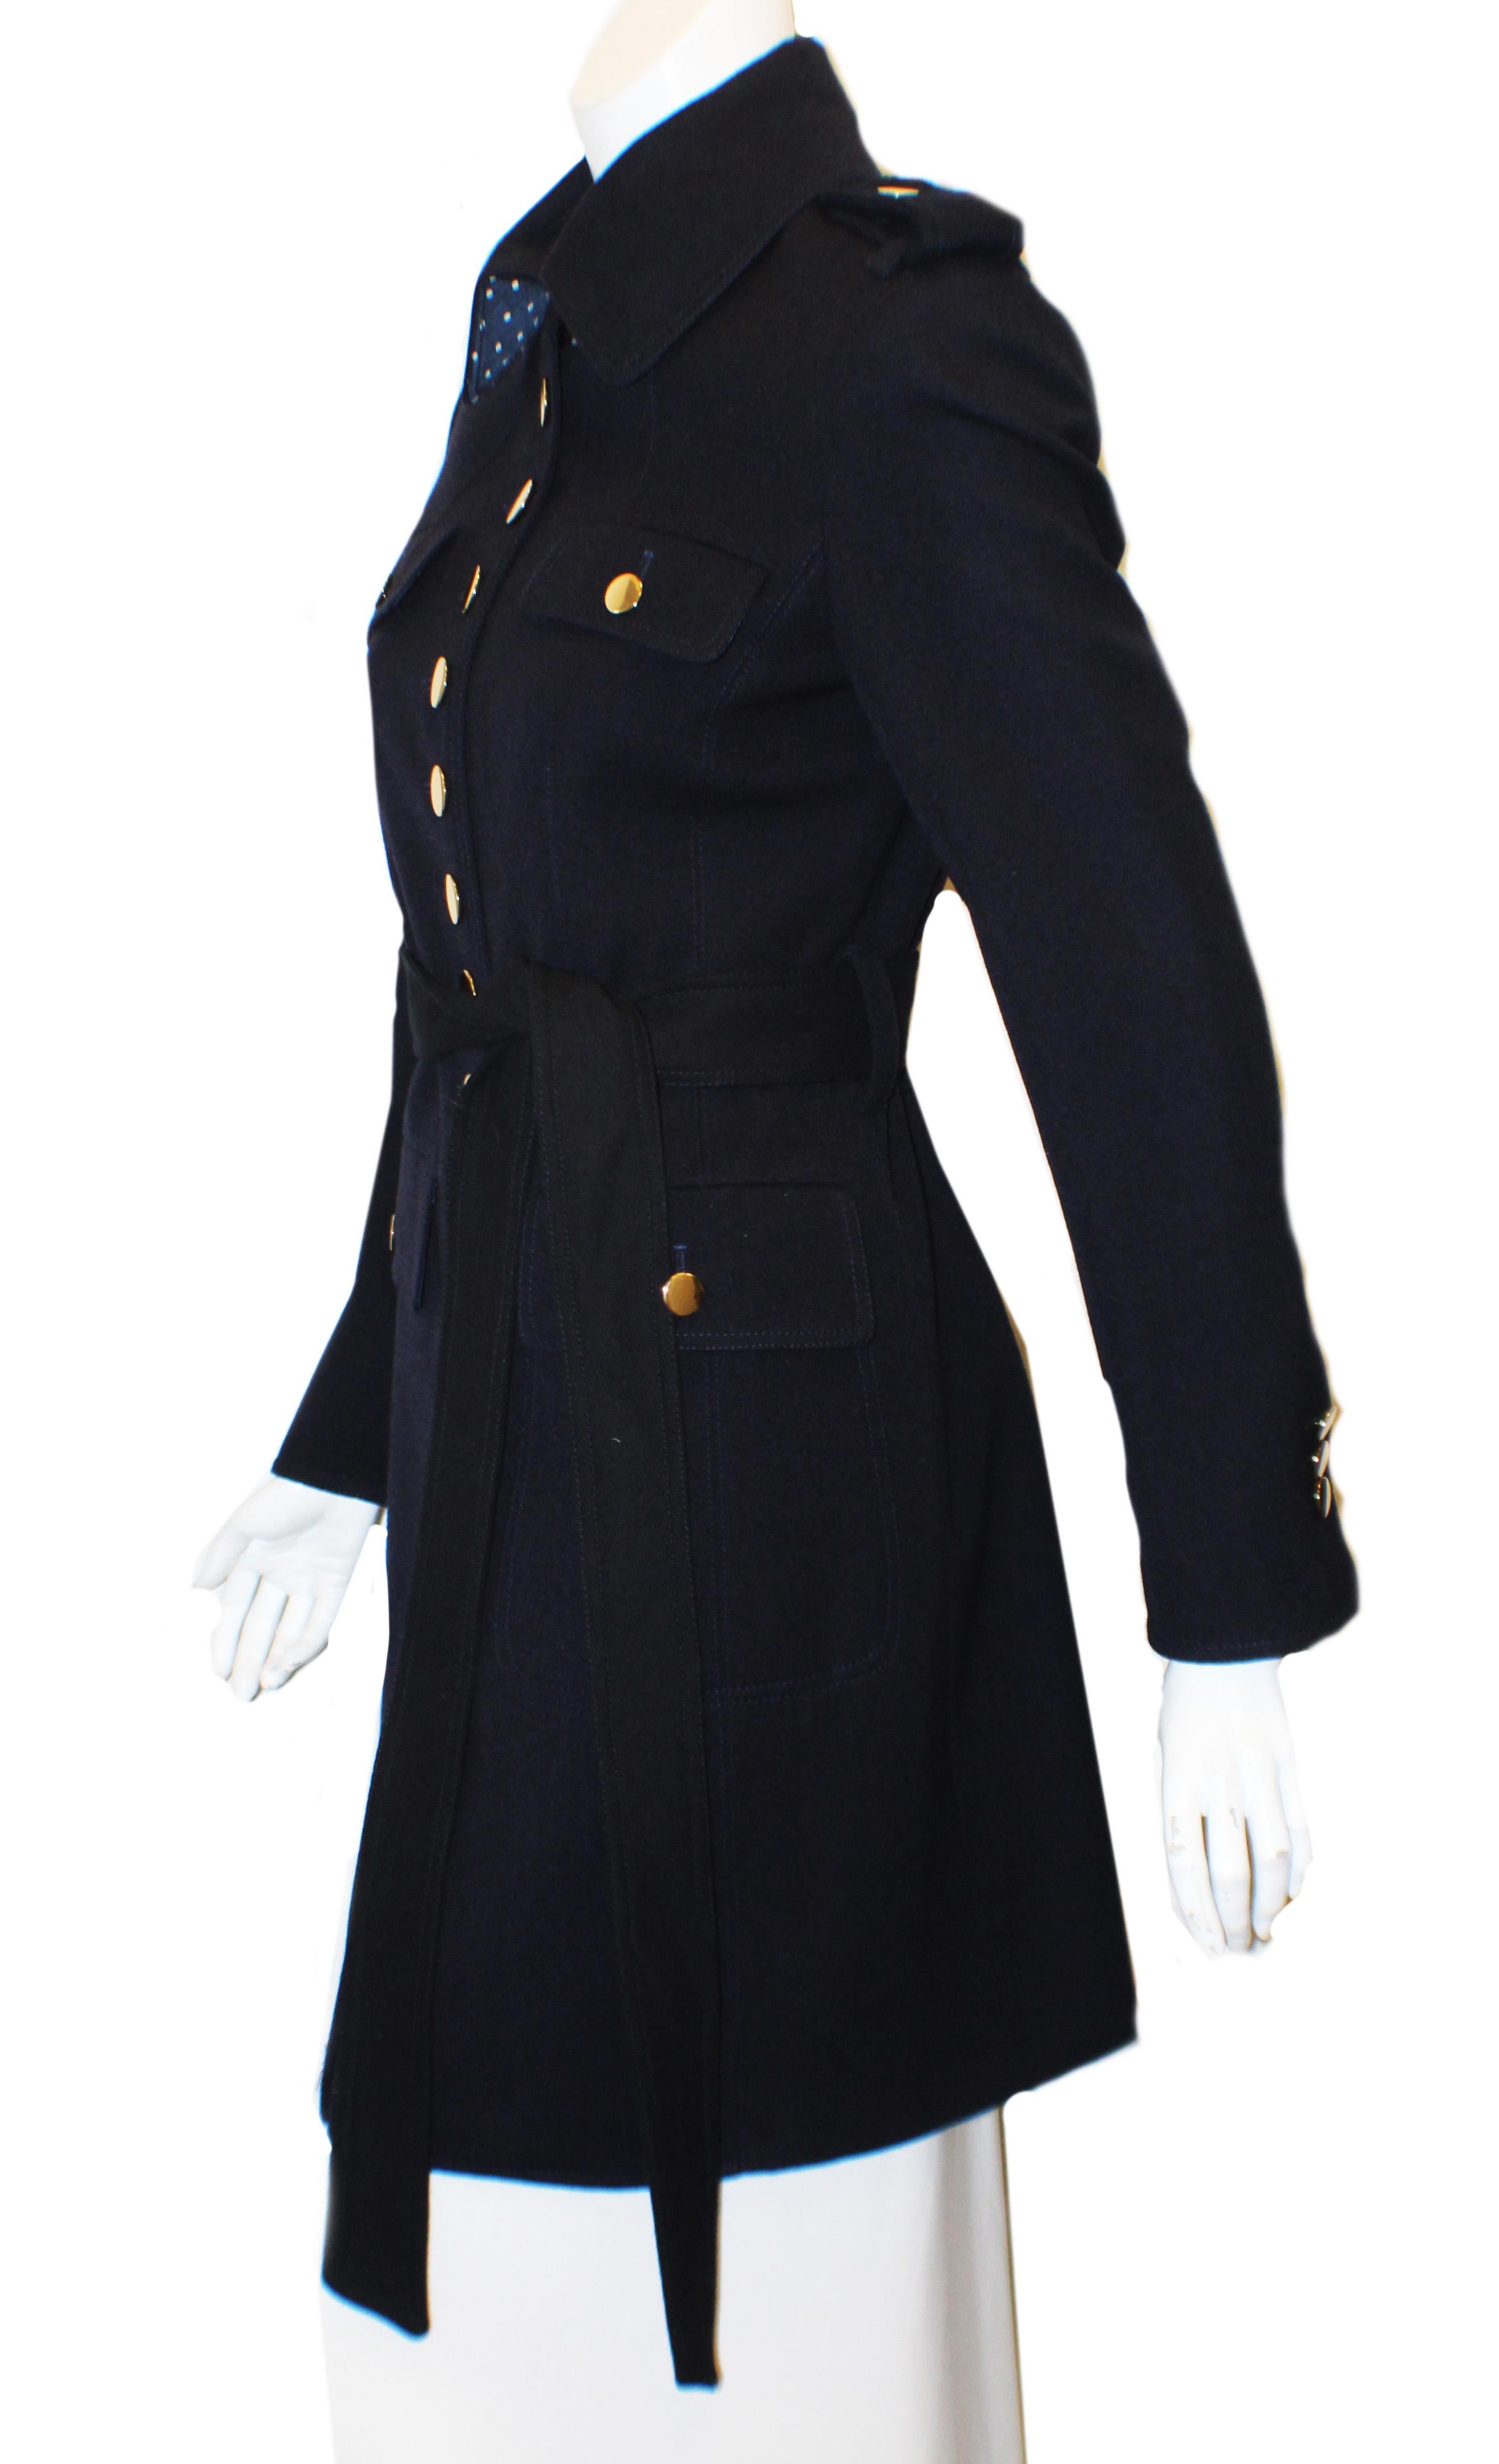 Moloh, a current designer from the United Kingdom, tends to make primarily military styled jackets, coats, and other stylish outerwear.  This beautiful 100% navy wool 3/4 coat is fashioned in the military style and comes from their 2014